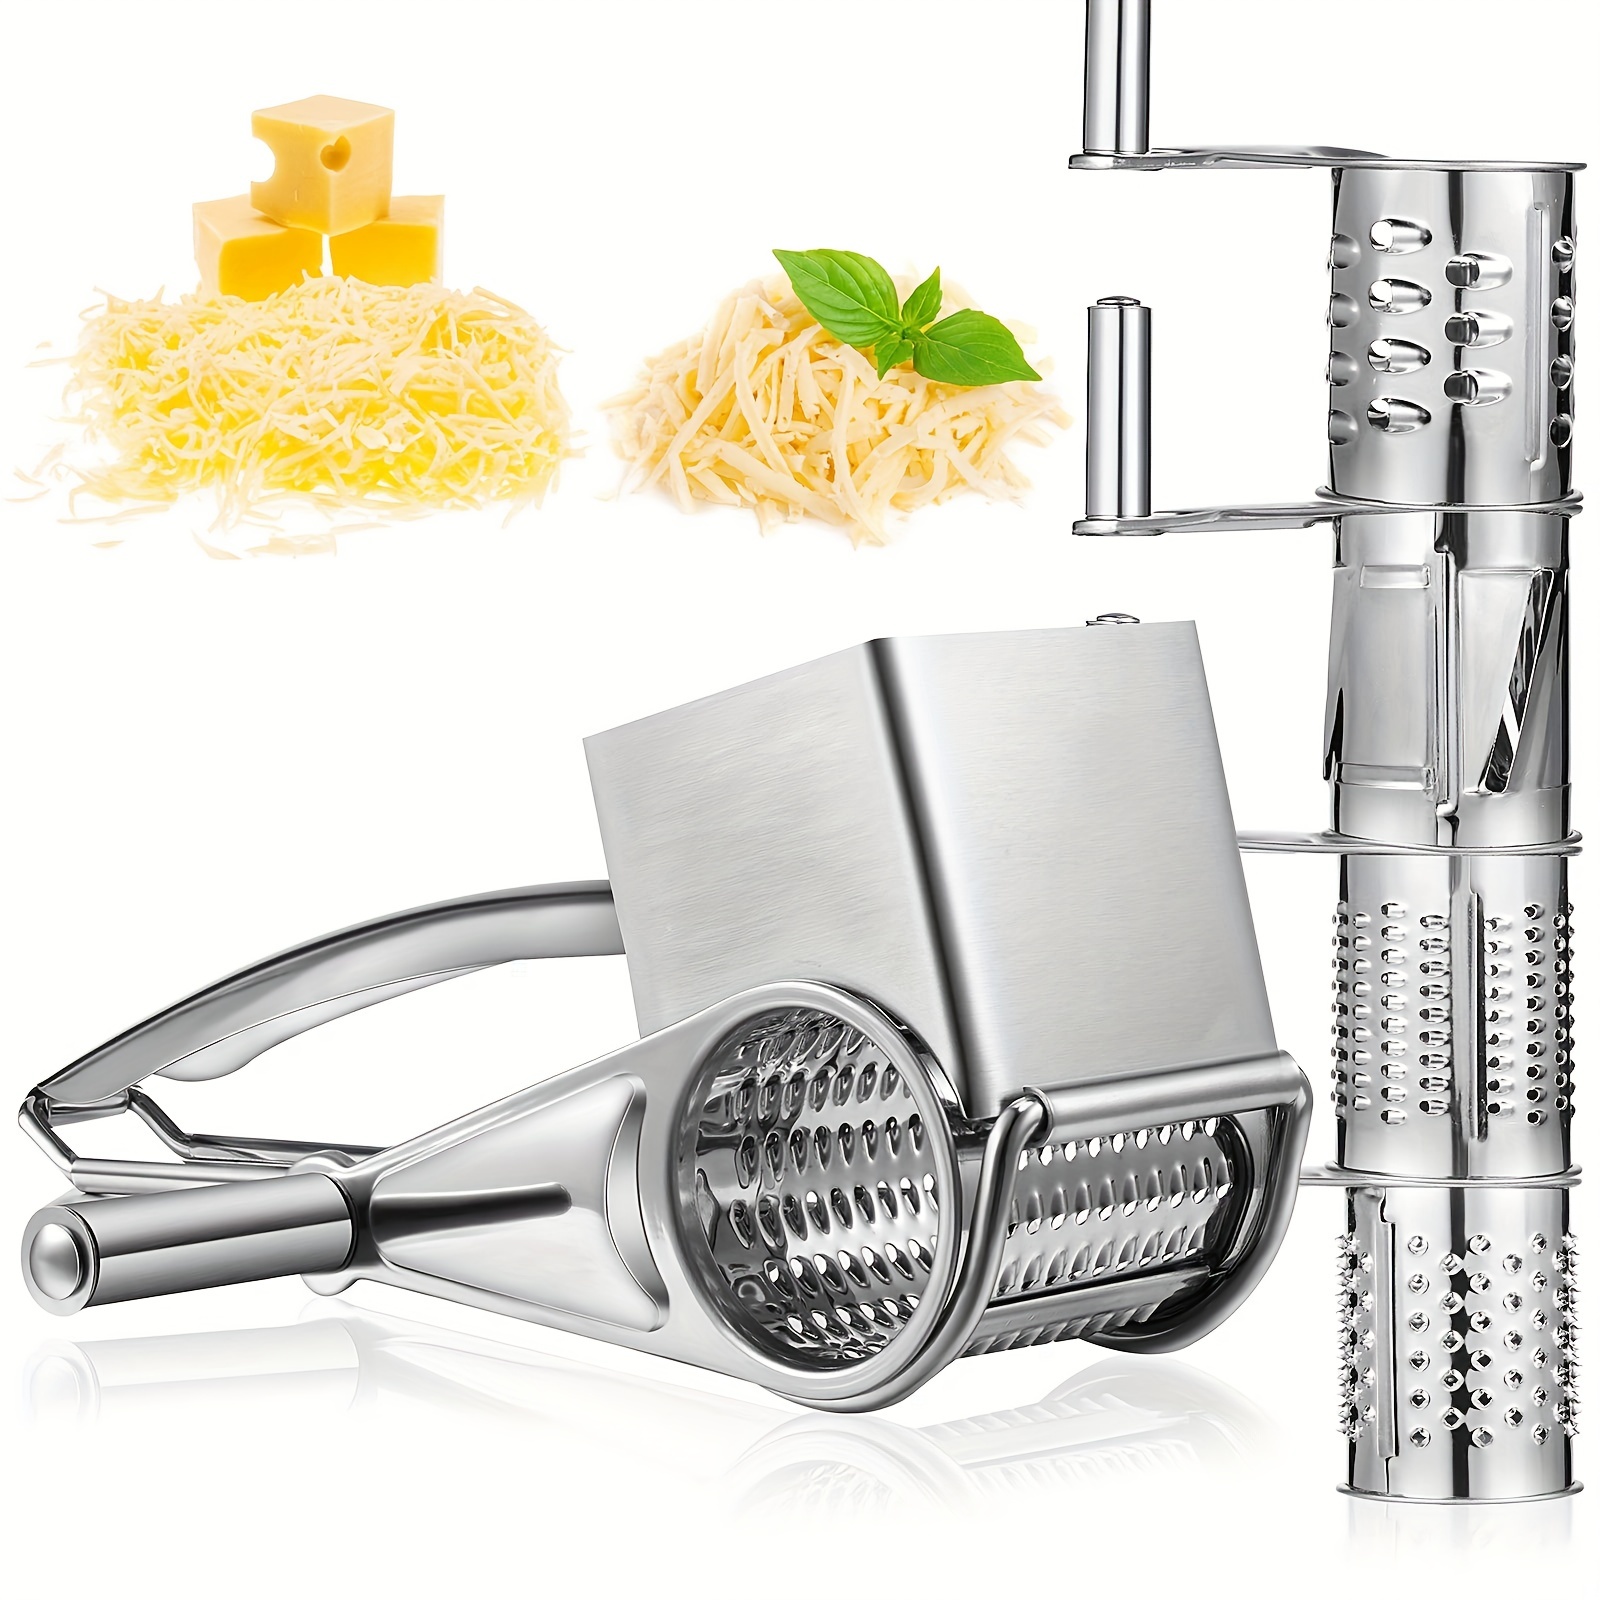 Best Rotary Cheese Graters in 2023 - Top 5 Review  Plastic/Stainless Steel Cheese  Graters 